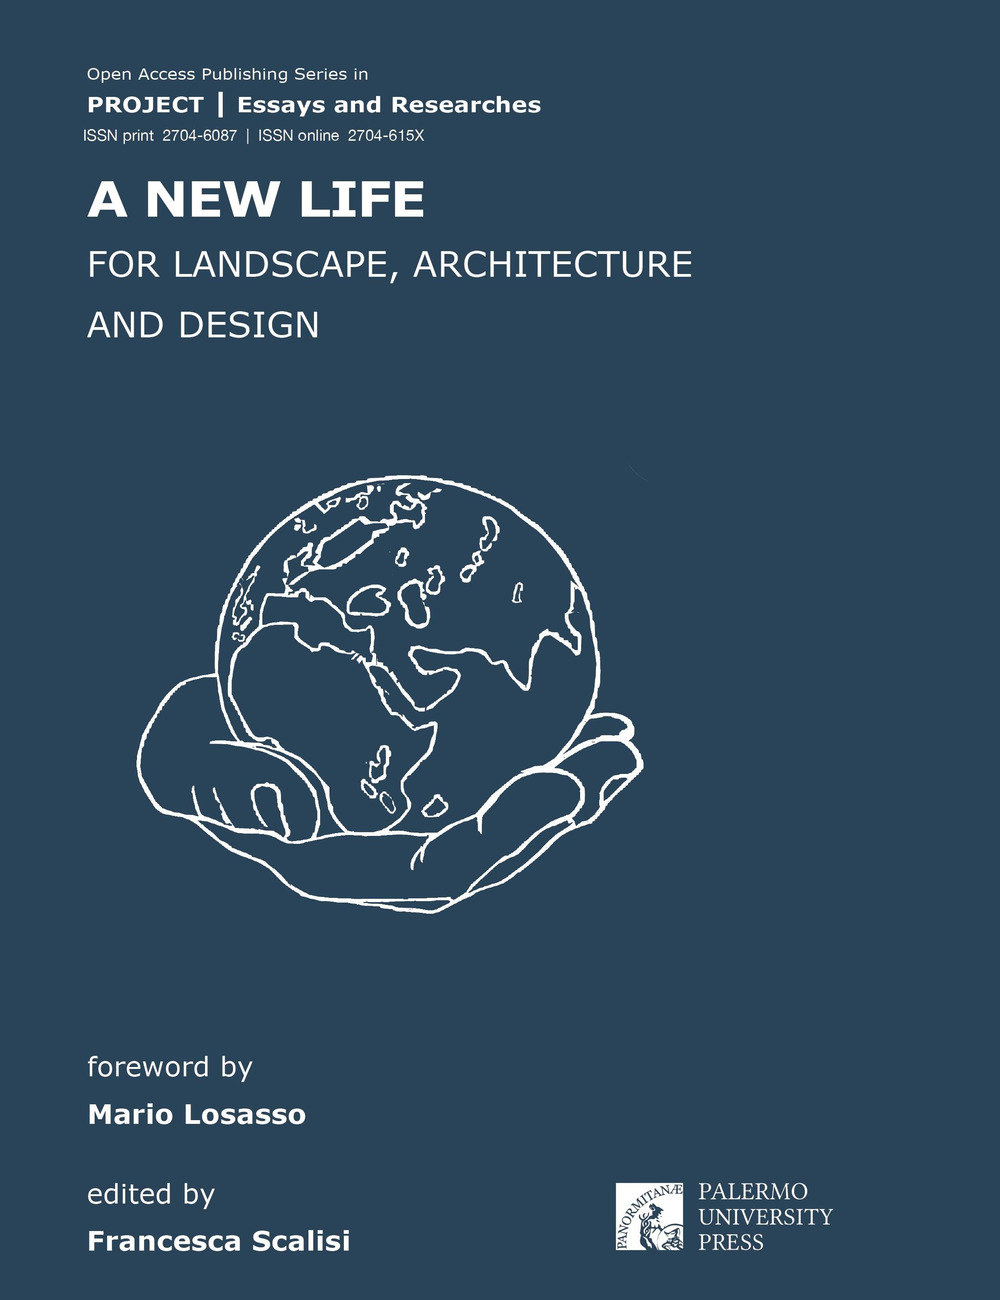 A new life for landscape, architecture and design